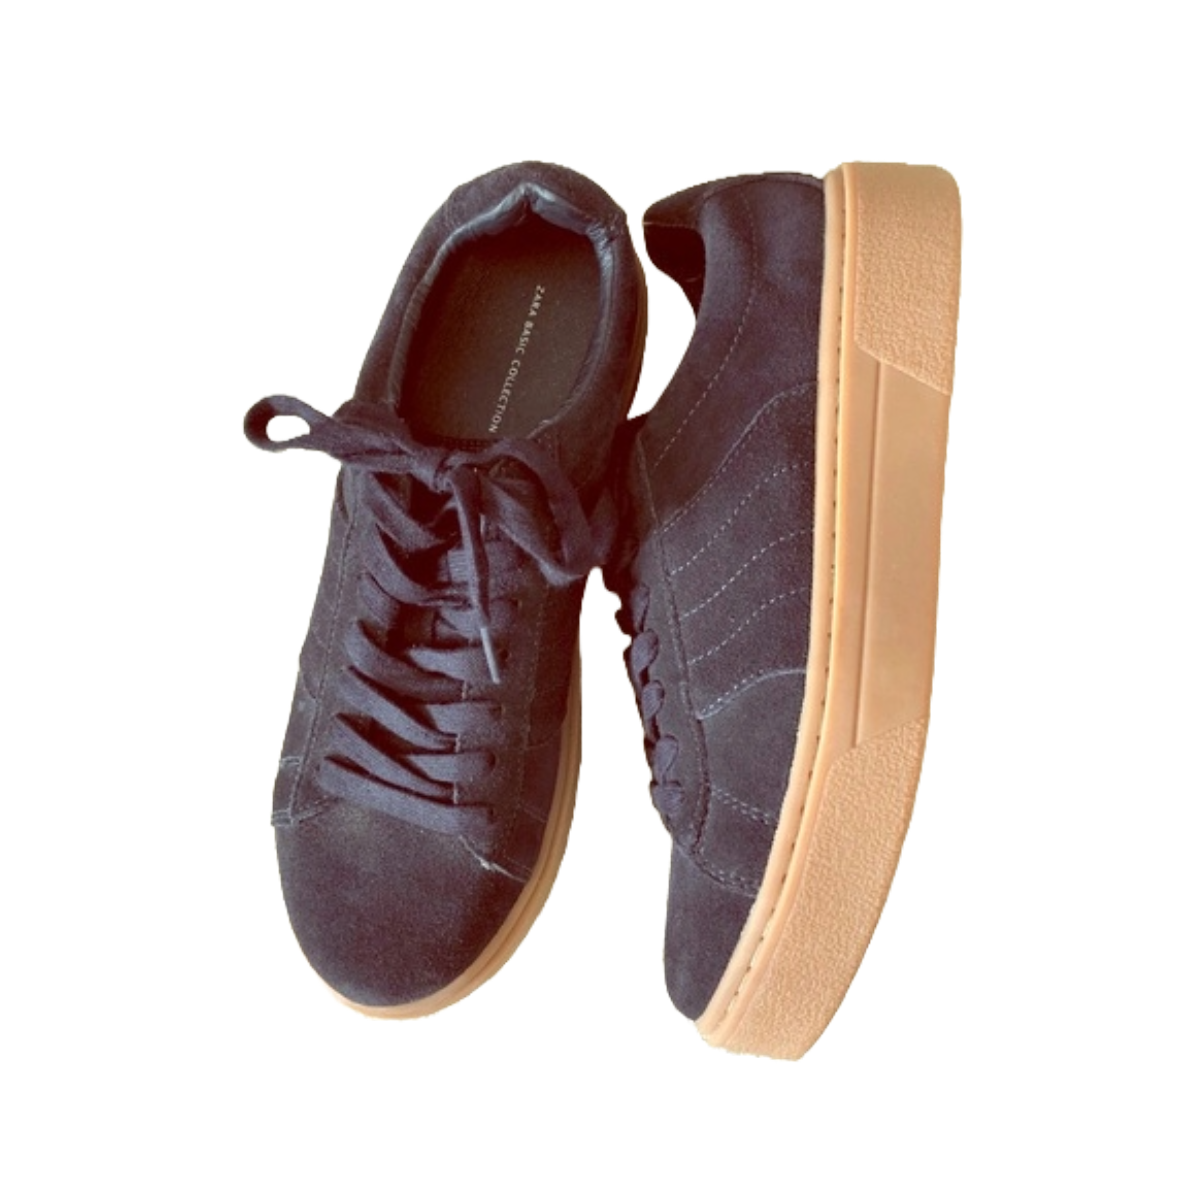 Zara Suede Trainers.png